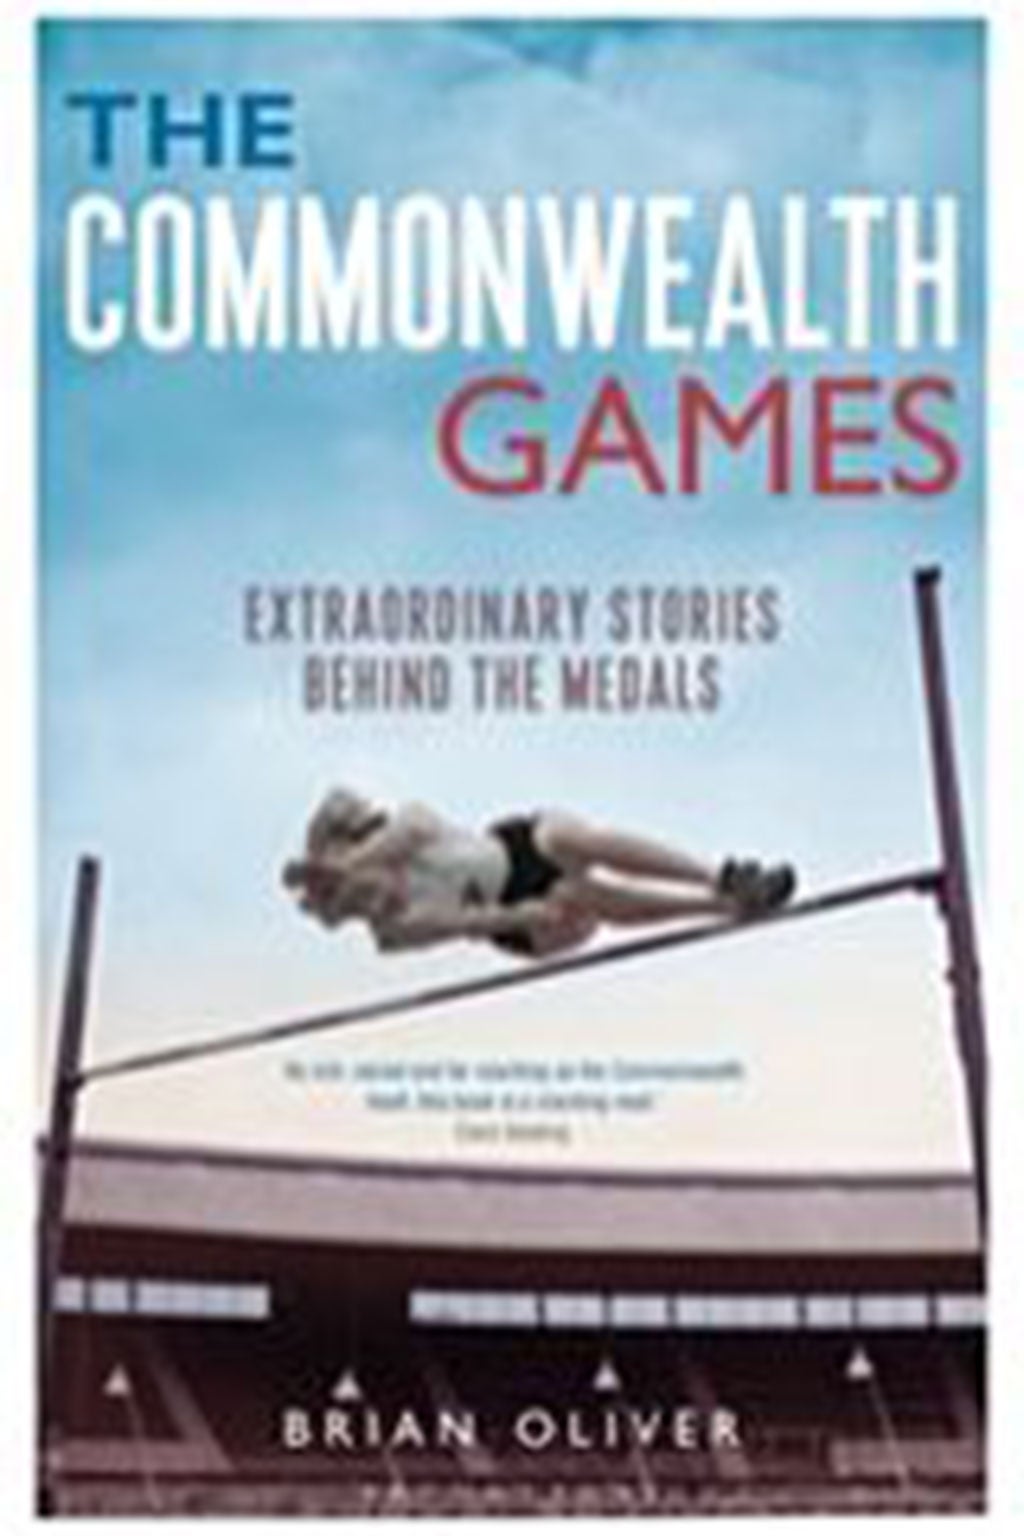 The Commonwealth Games by Brian Oliver